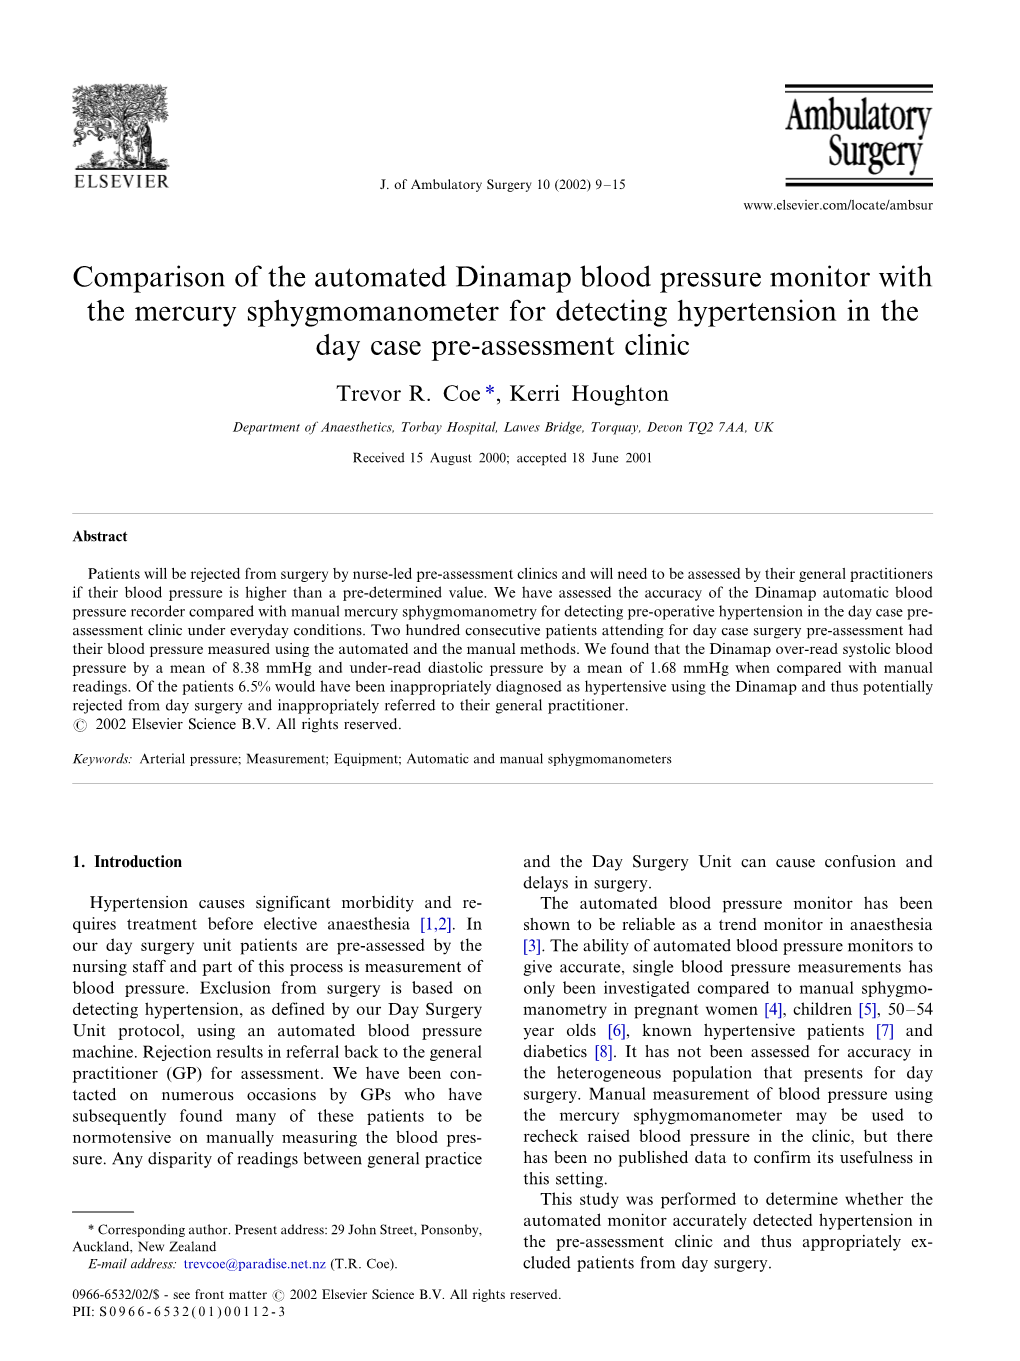 Comparison of the Automated Dinamap Blood Pressure Monitor with the Mercury Sphygmomanometer for Detecting Hypertension in the Day Case Pre-Assessment Clinic